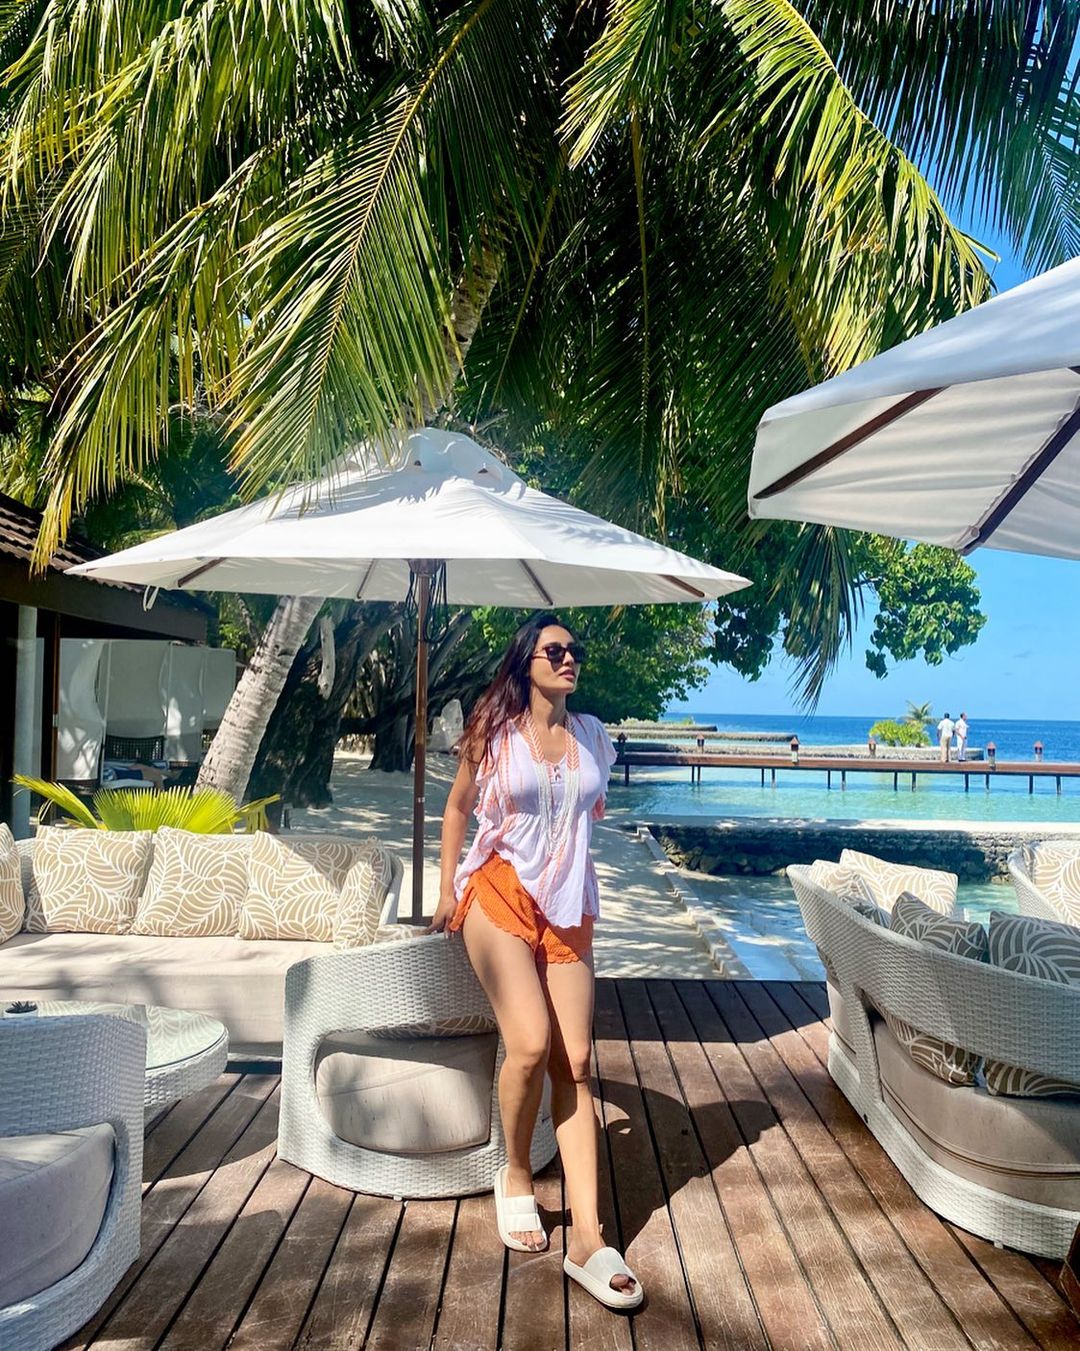 Surbhi Jyoti keeps it cool and casual in her beach wear.